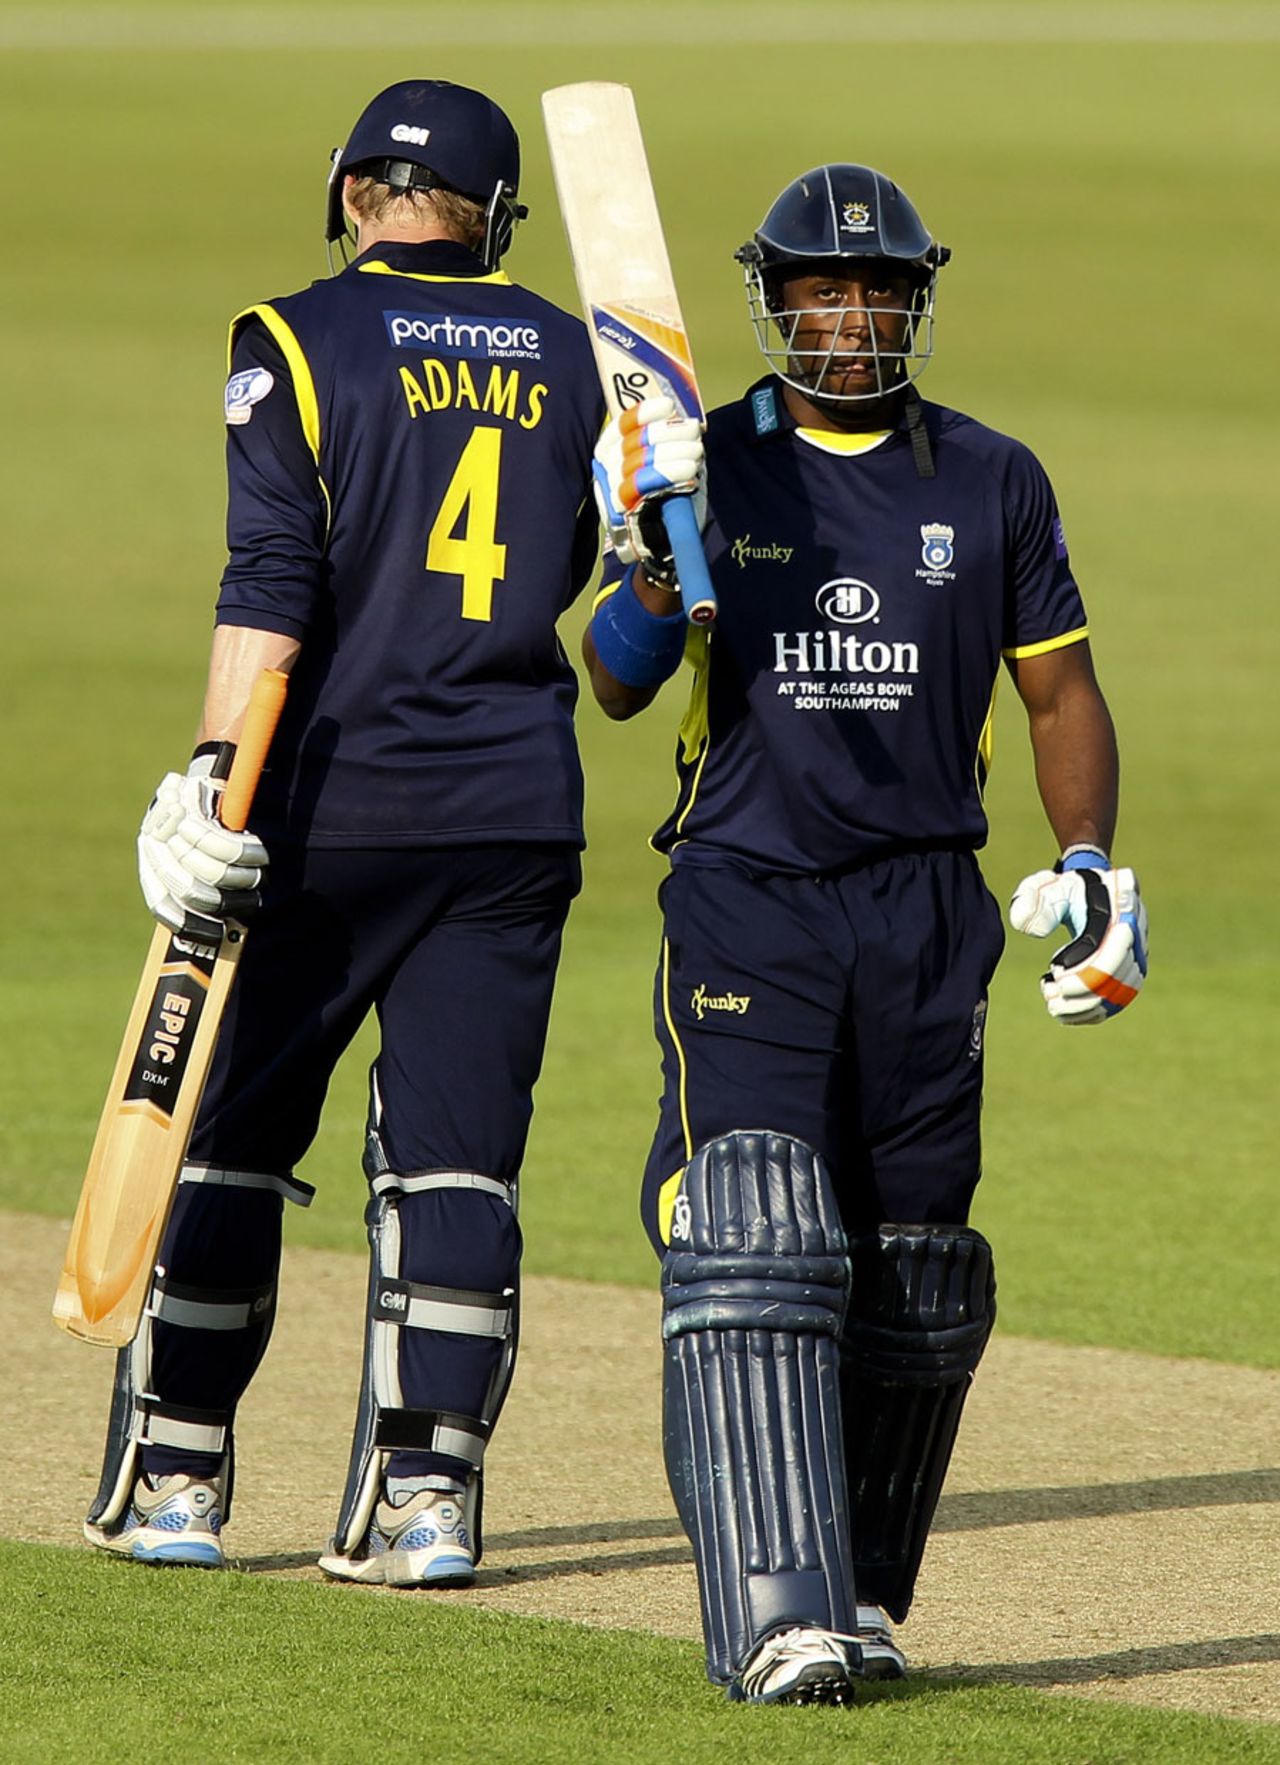 Jimmy Adams and Michael Carberry put on 133 together, Hampshire v Durham, Yorkshire Bank 40, Ageas Bowl, May 19, 2013